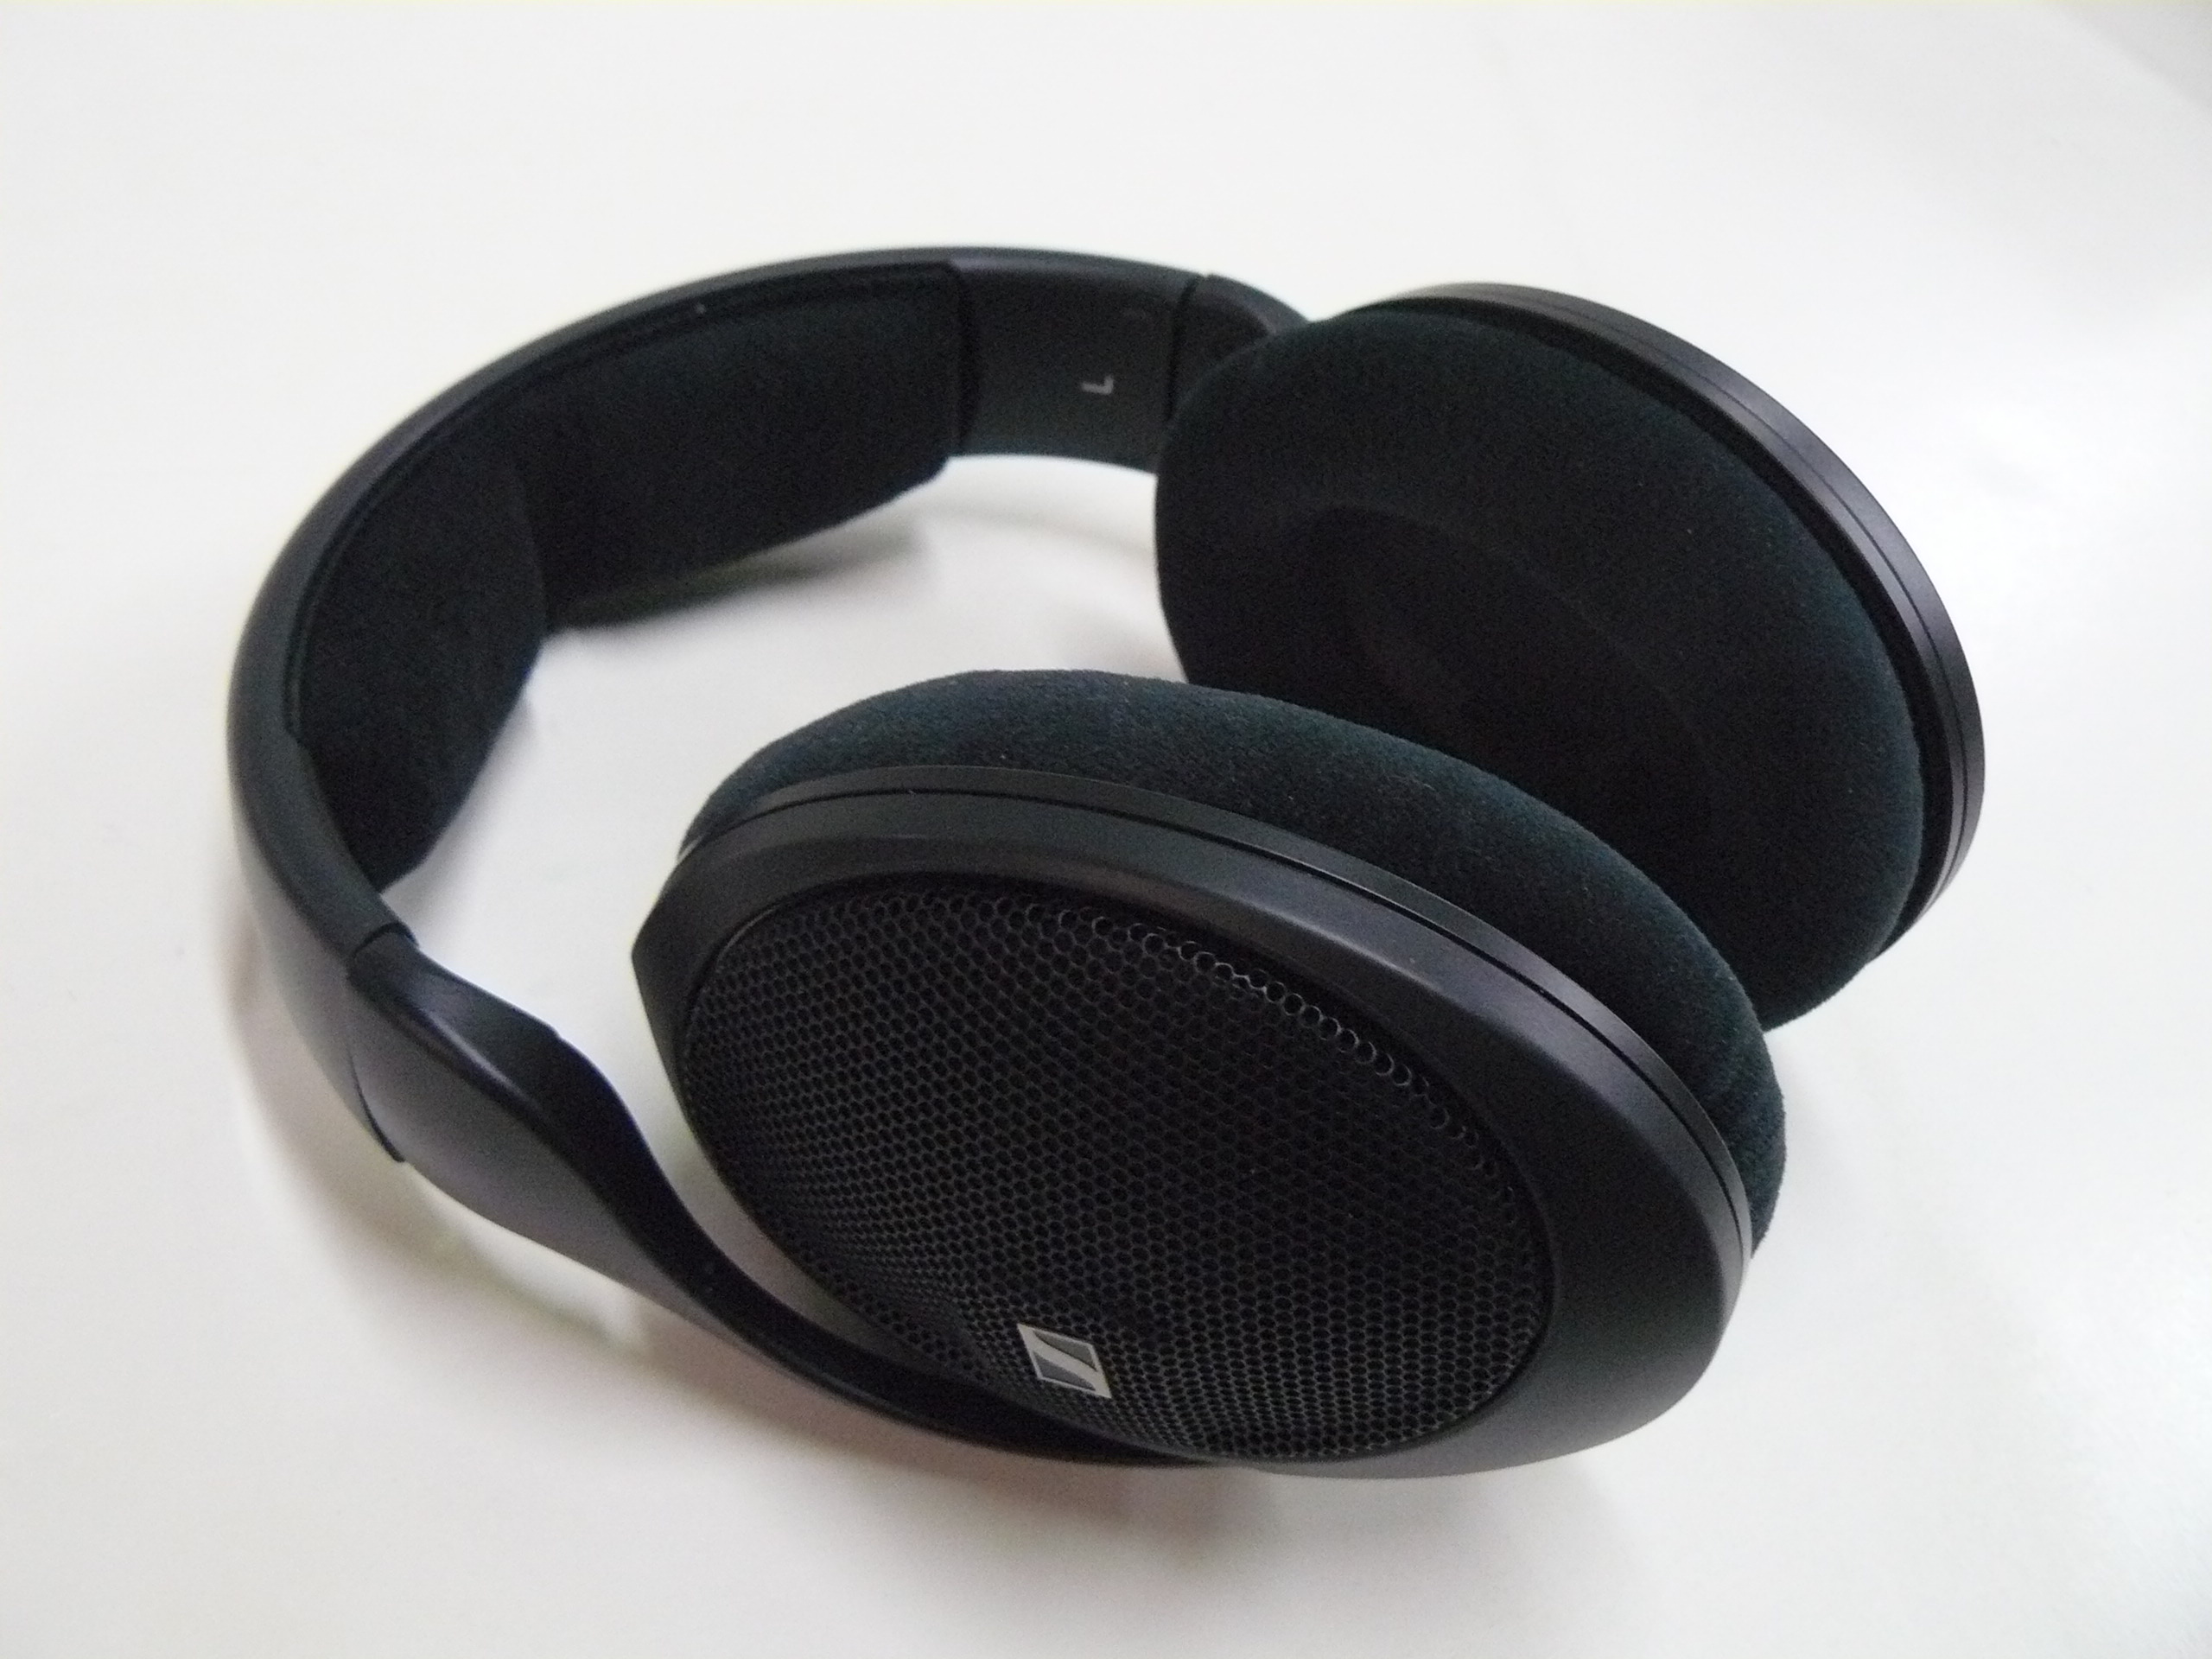 Sennheiser HD 560S Review - For The Masterful Not The Typical